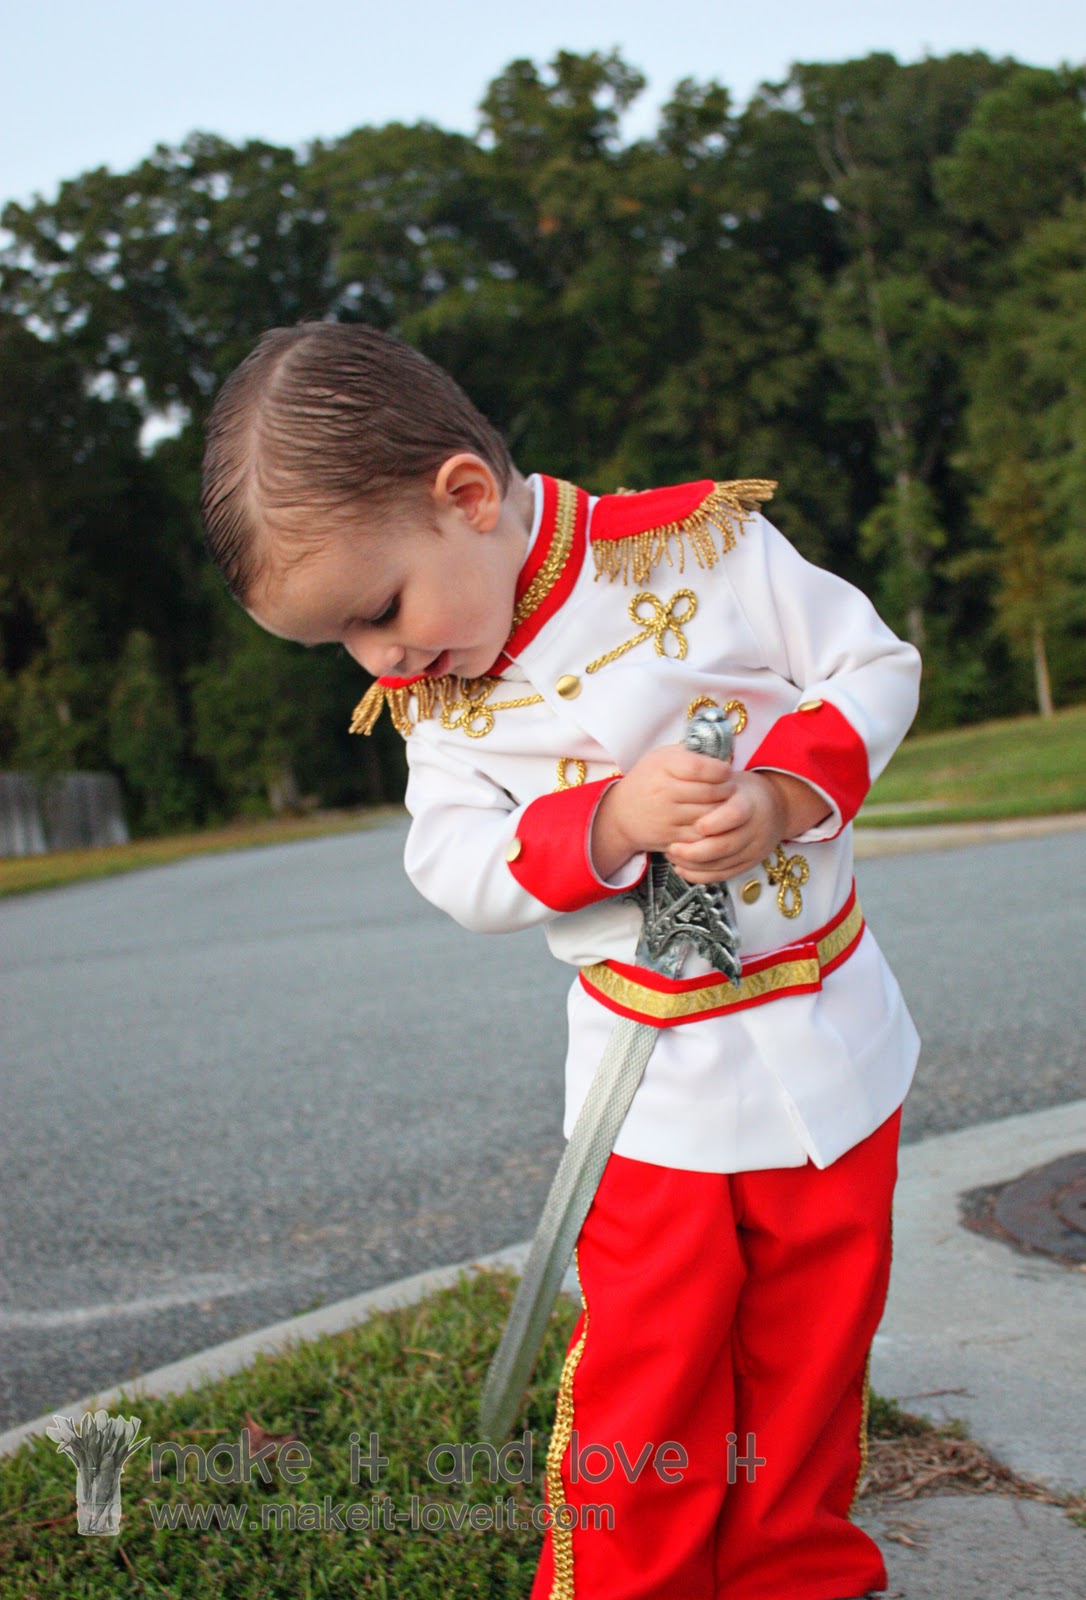 Prince Charming Costume Tutorial (from Cinderella) | Make It and Love It